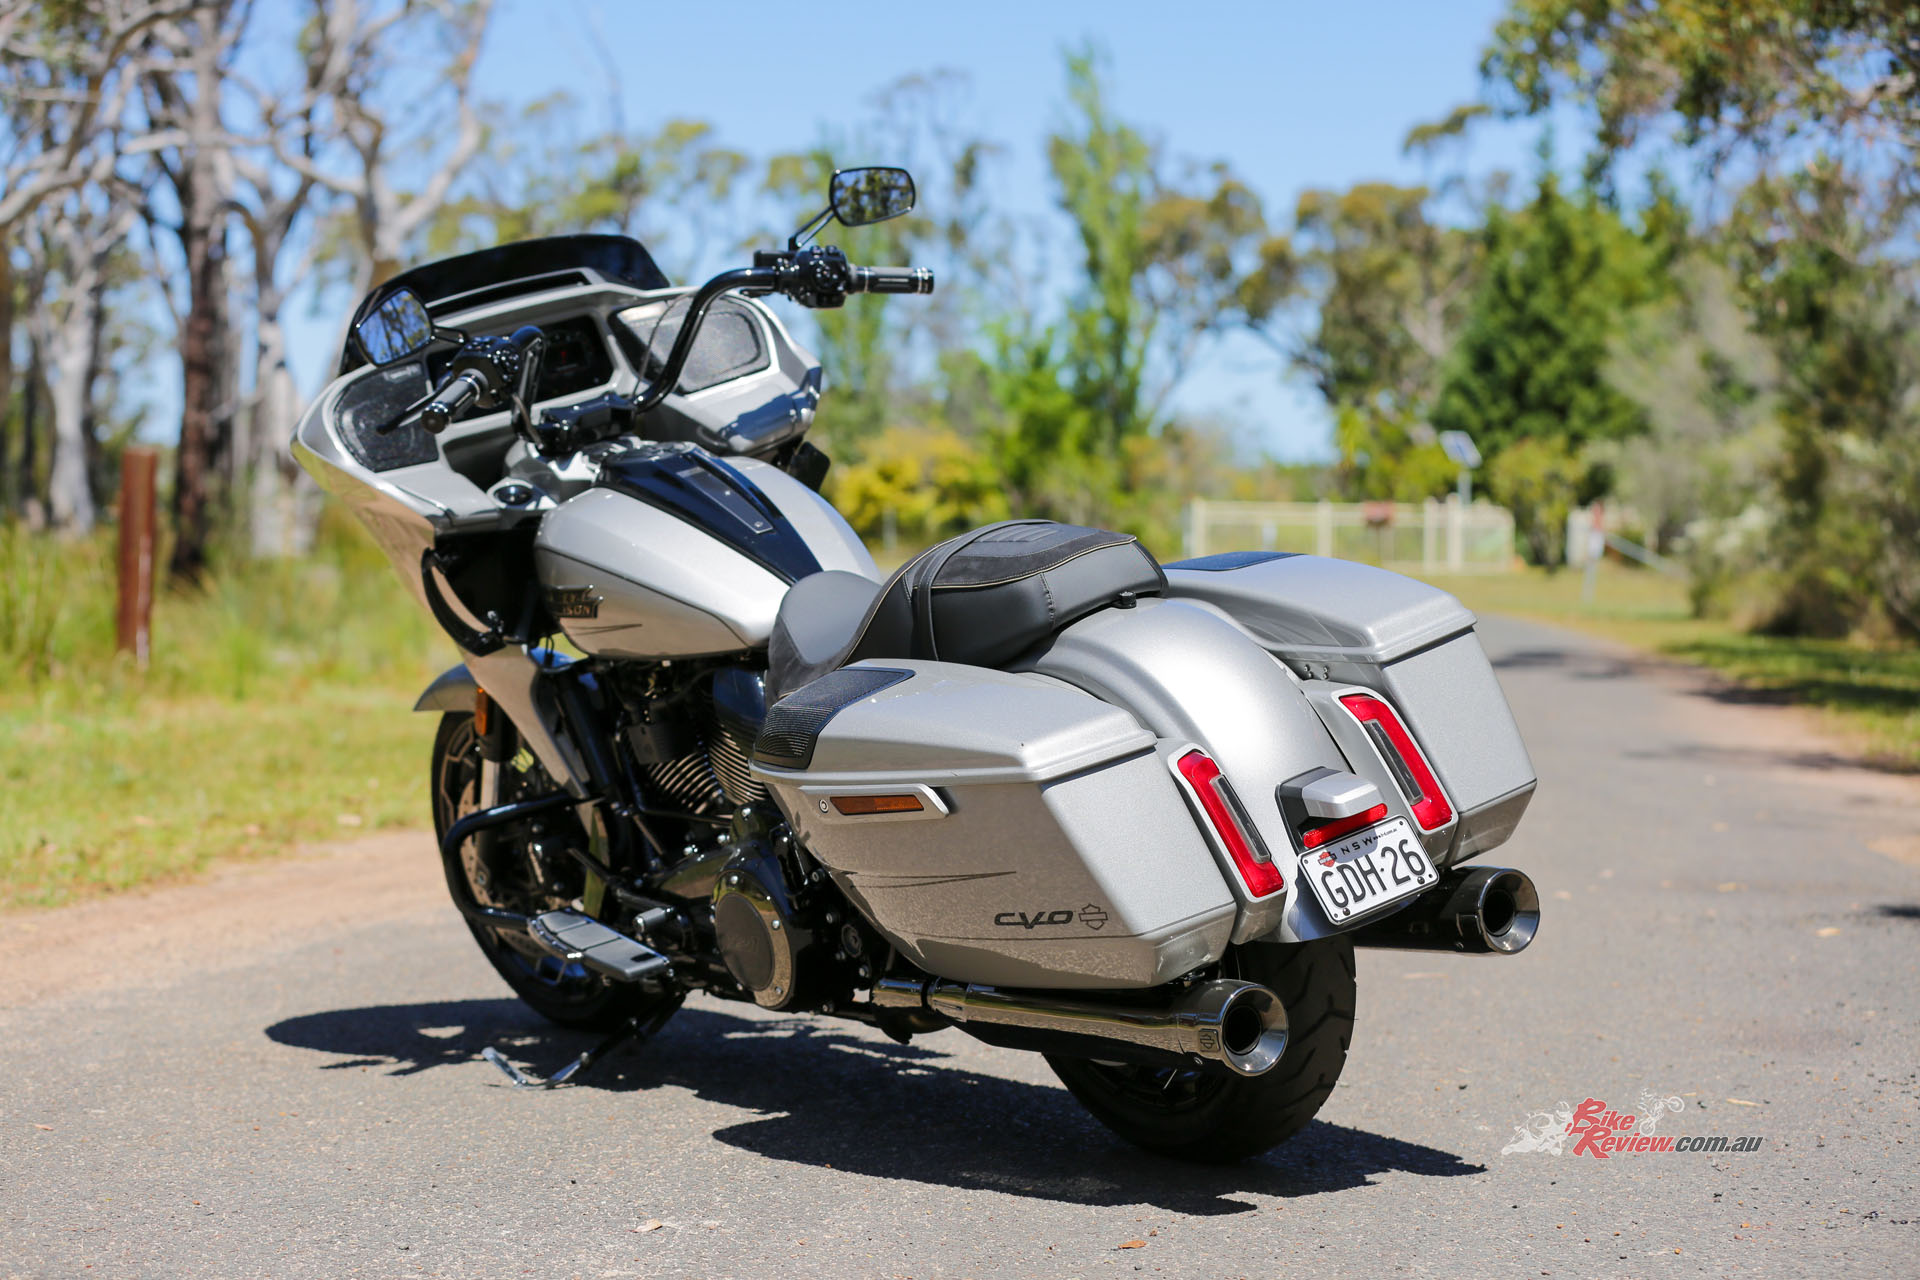 "The first peek at the new Road Glide CVO and it can only be described as intimidating. The bike is humongous in all dimensions, the screen is bigger than an iPad, and the engine is the largest capacity I've ever tested."